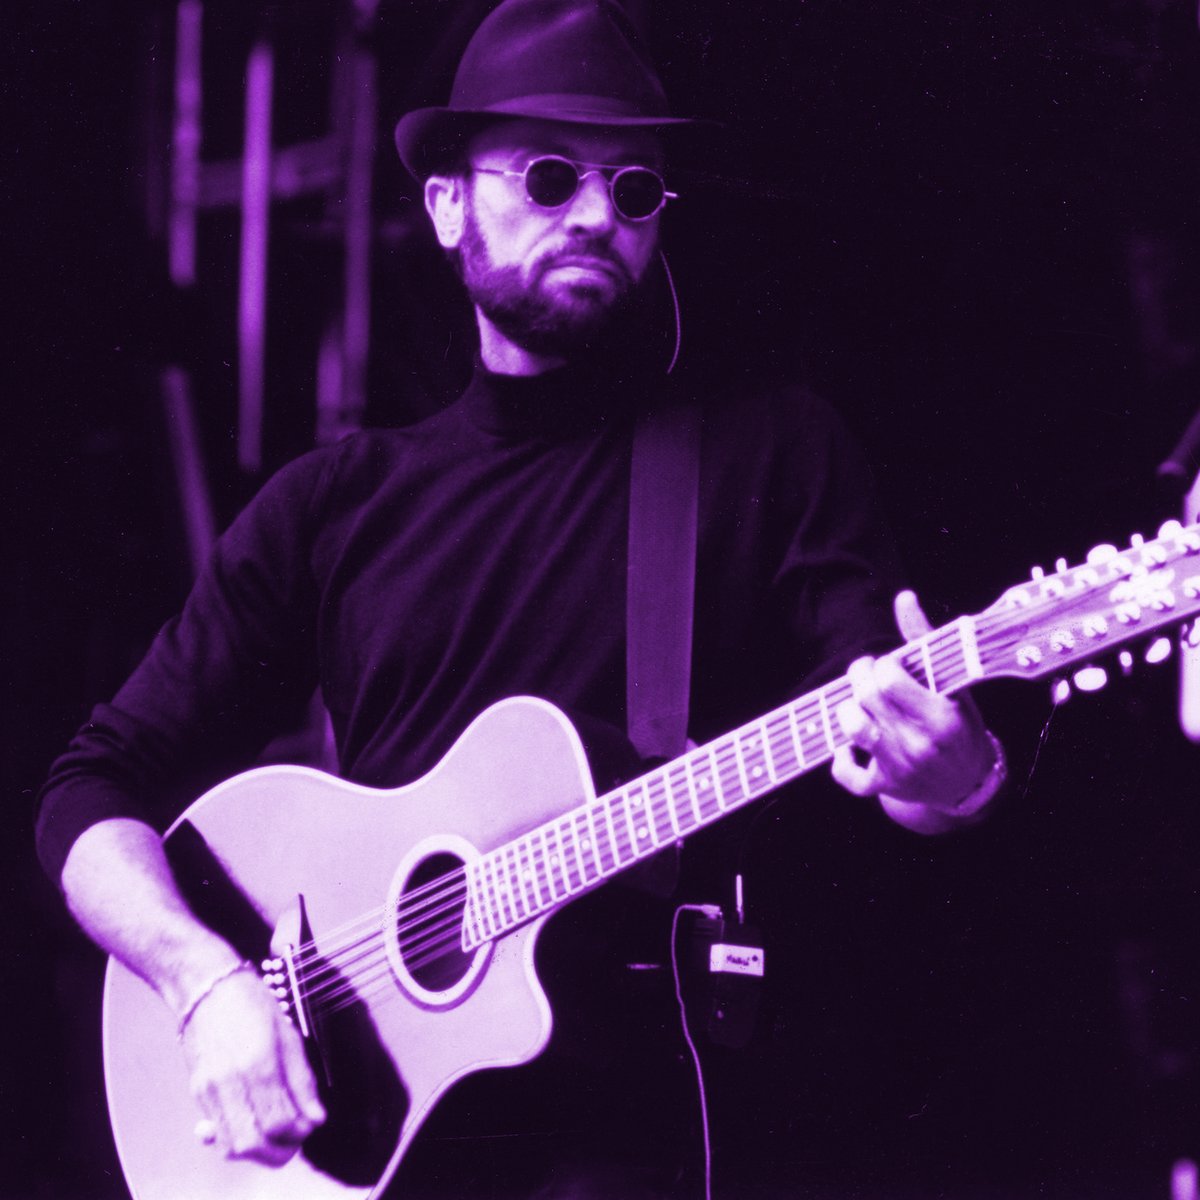 Today, January 12th, marks the 20th anniversary of the passing of #MauriceGibb